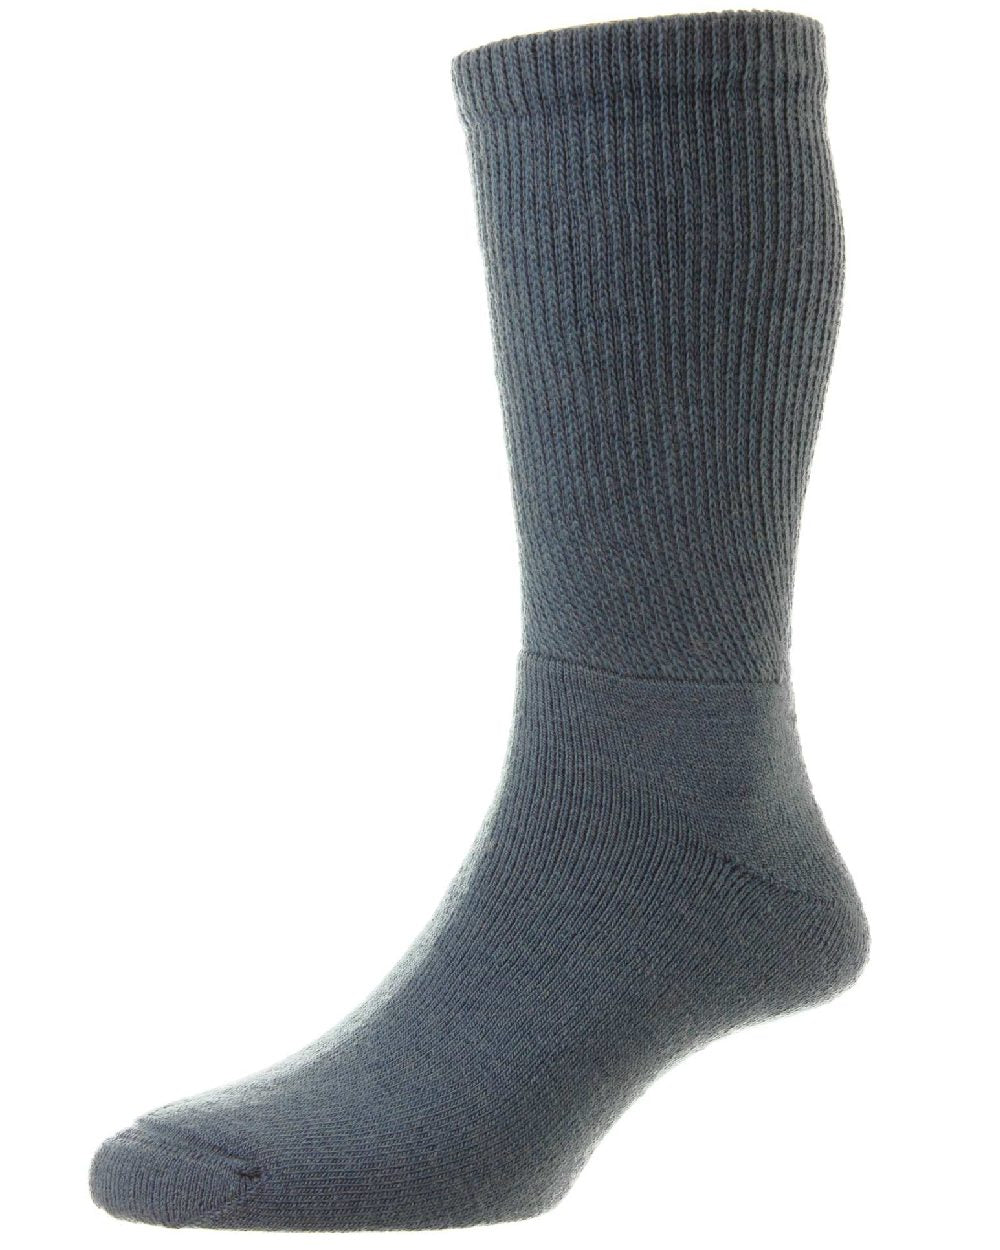 Airforce coloured HJ Hall Diabetic Wool Socks on white background  